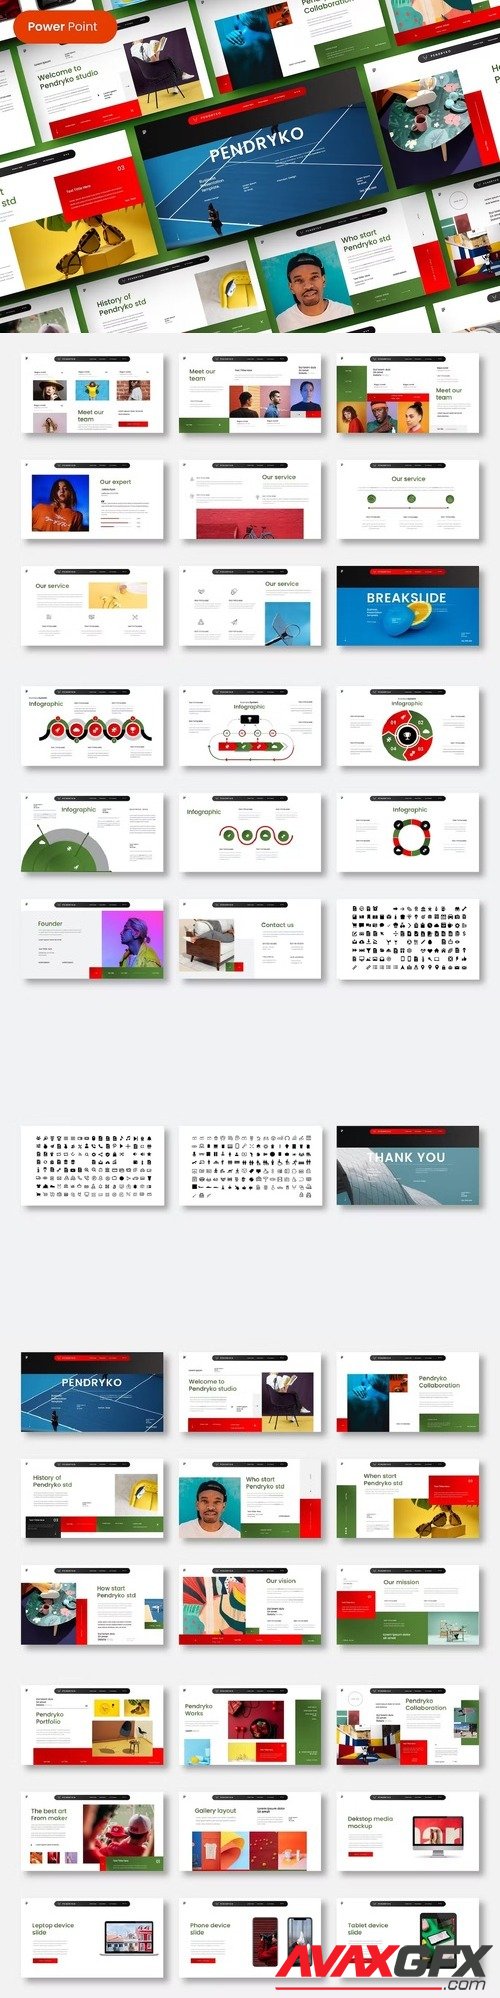 Pendryko – Business PowerPoint Template 